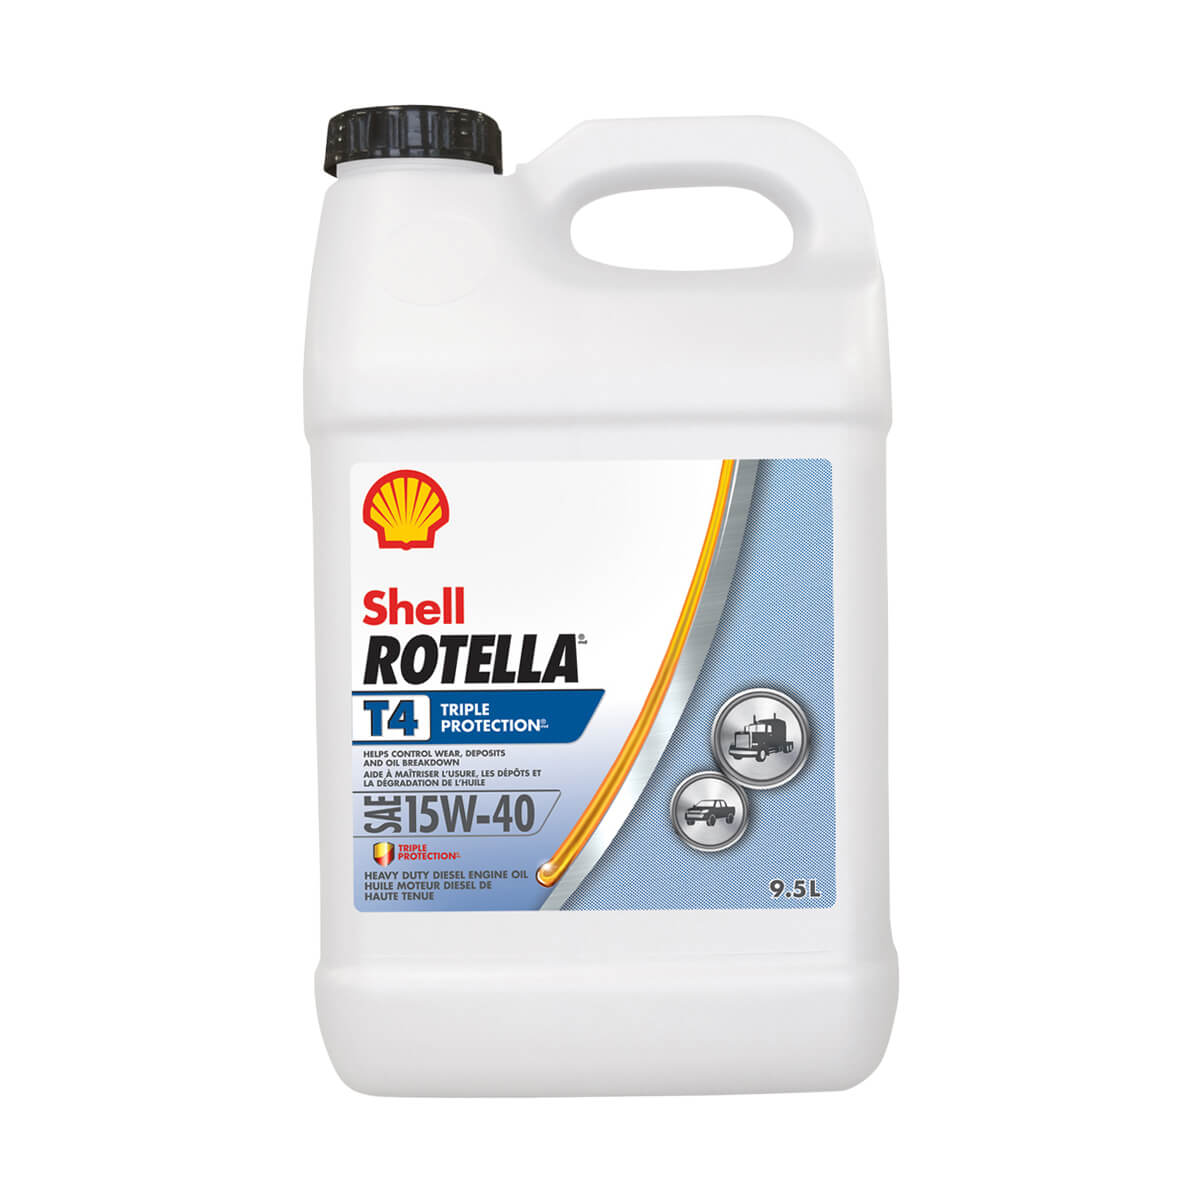 Shell Rotella T4 Triple Protection 15W-40 - 5 L